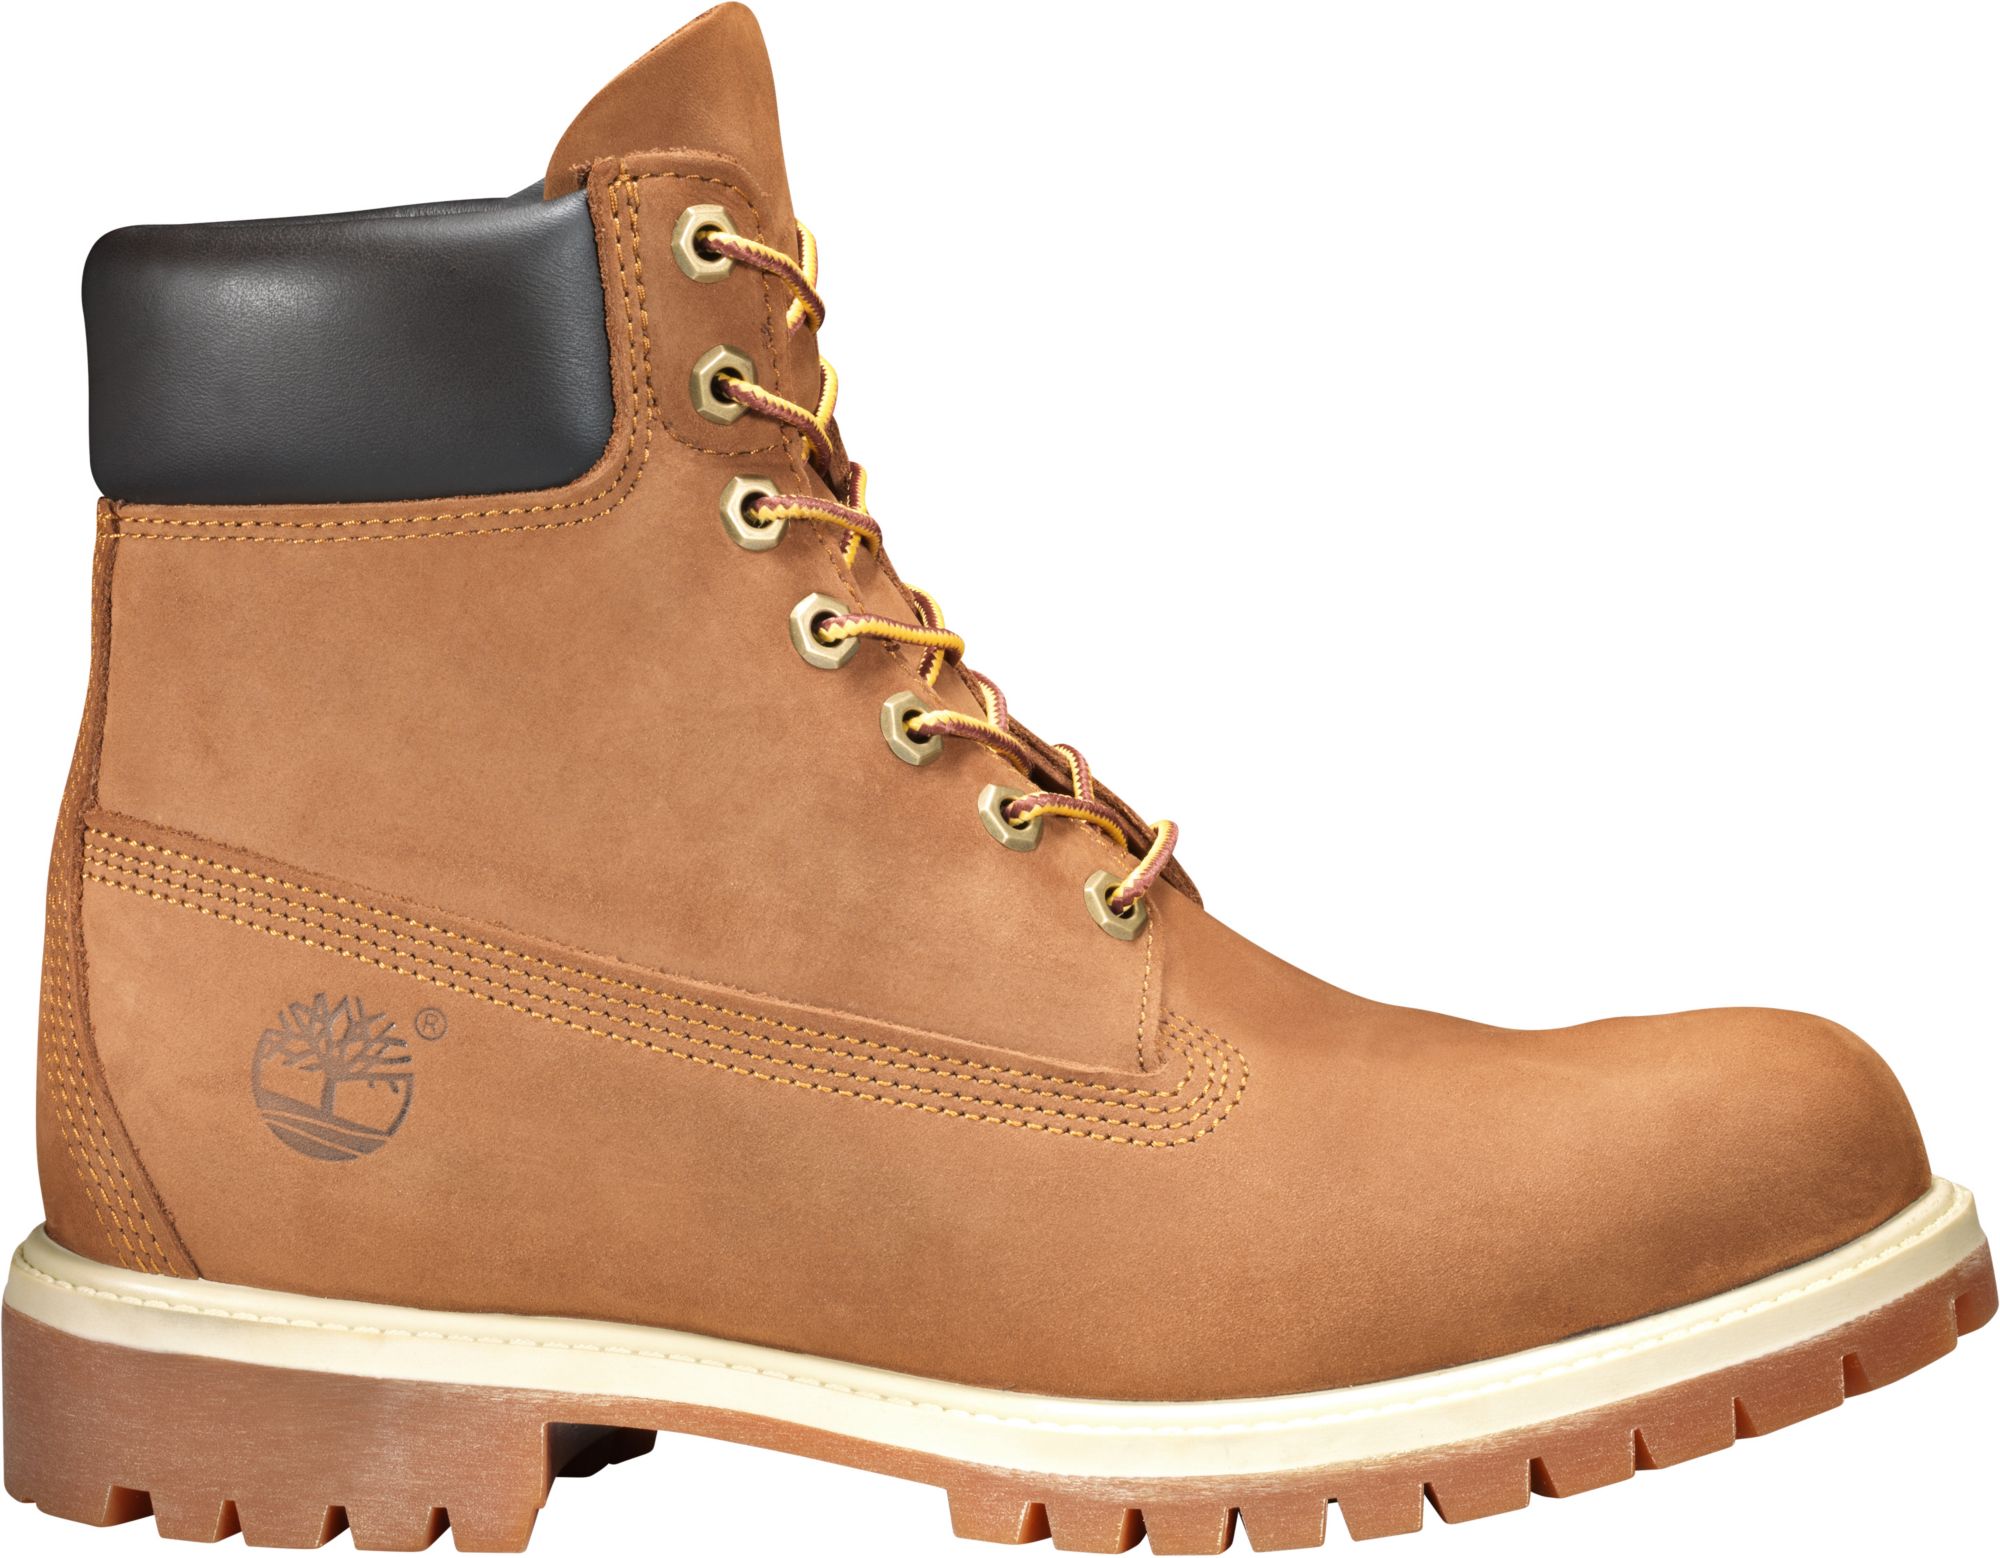 cheapest place to get timberland boots